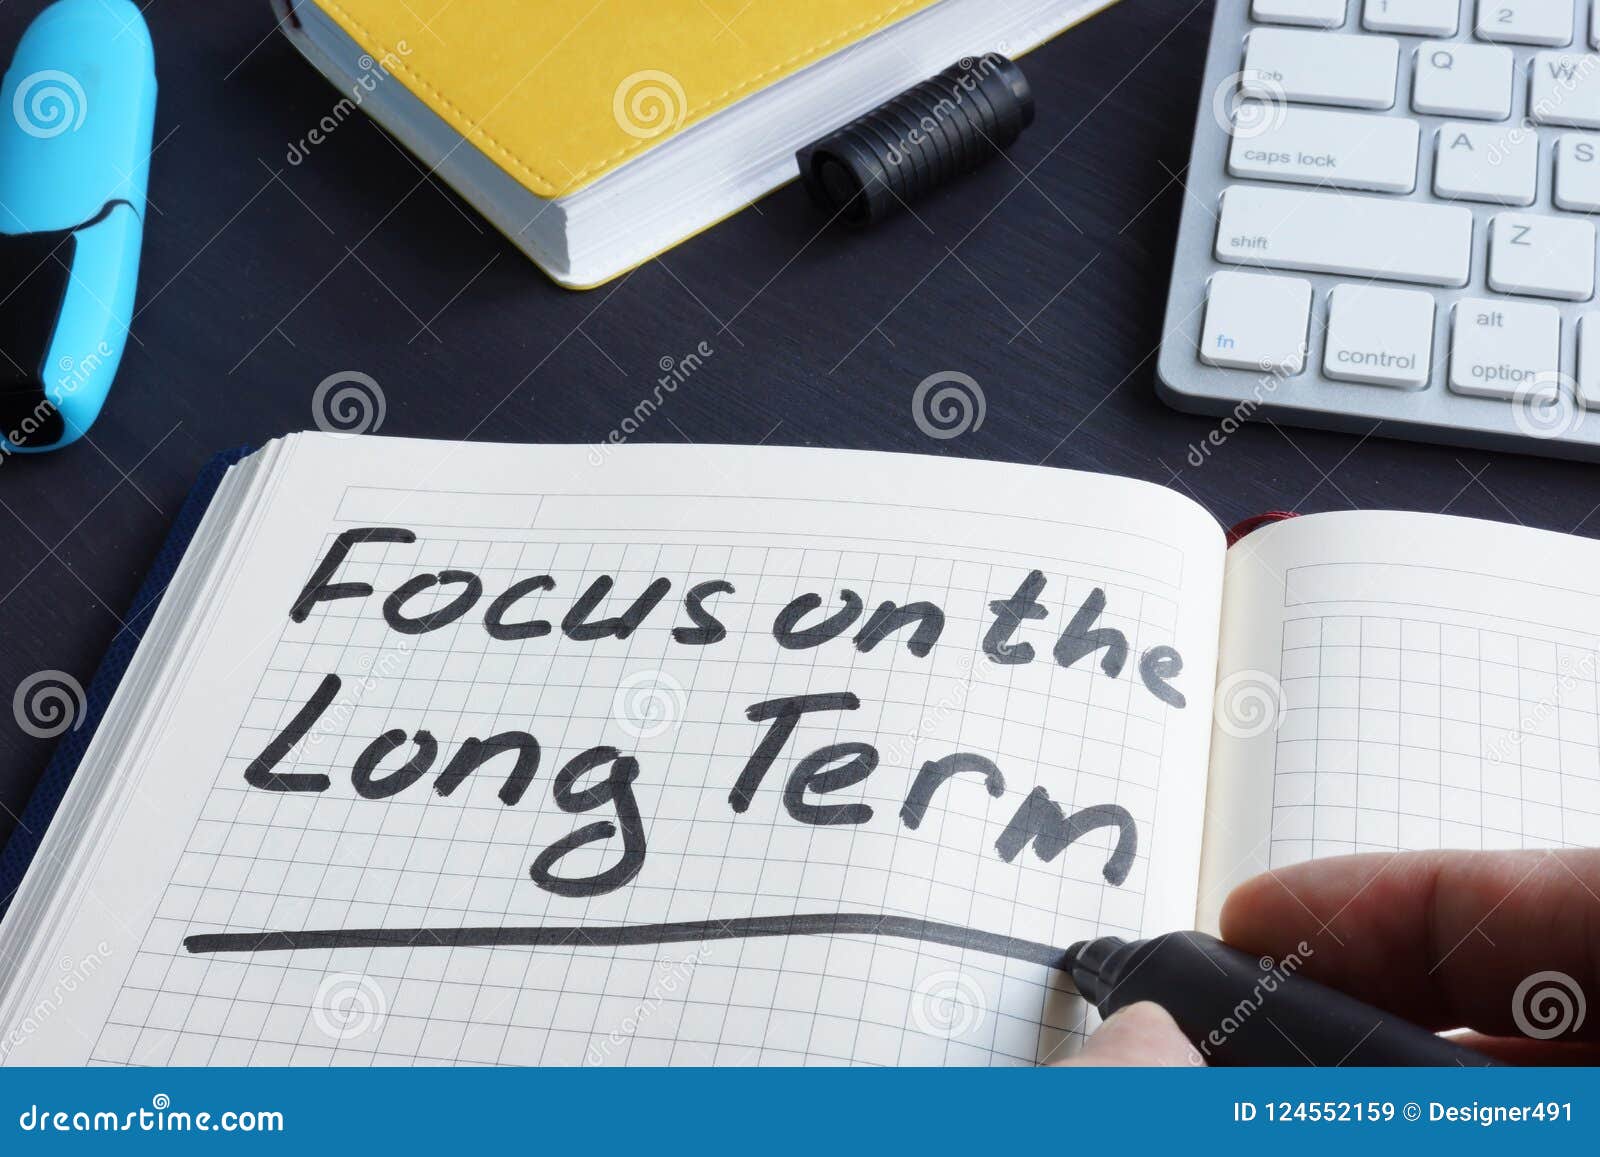 man is writing focus on the long term.